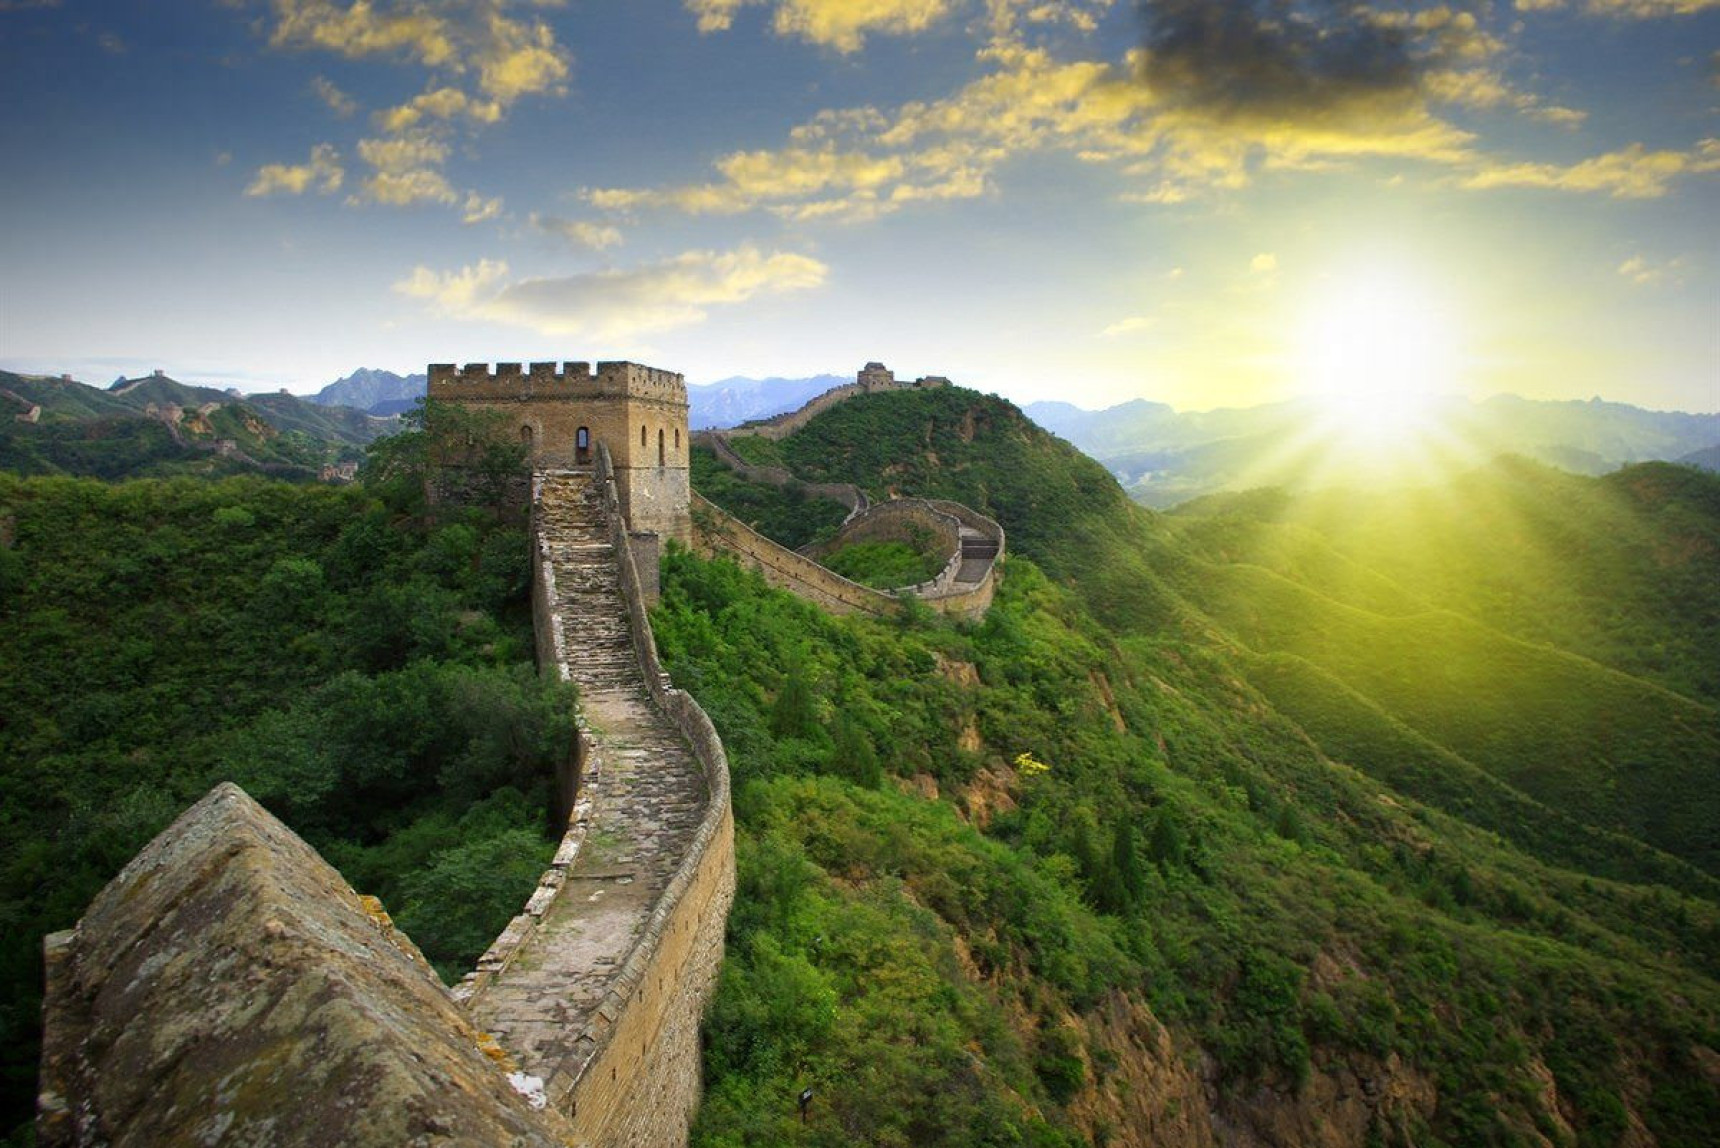 Great wall of China in the sunlight